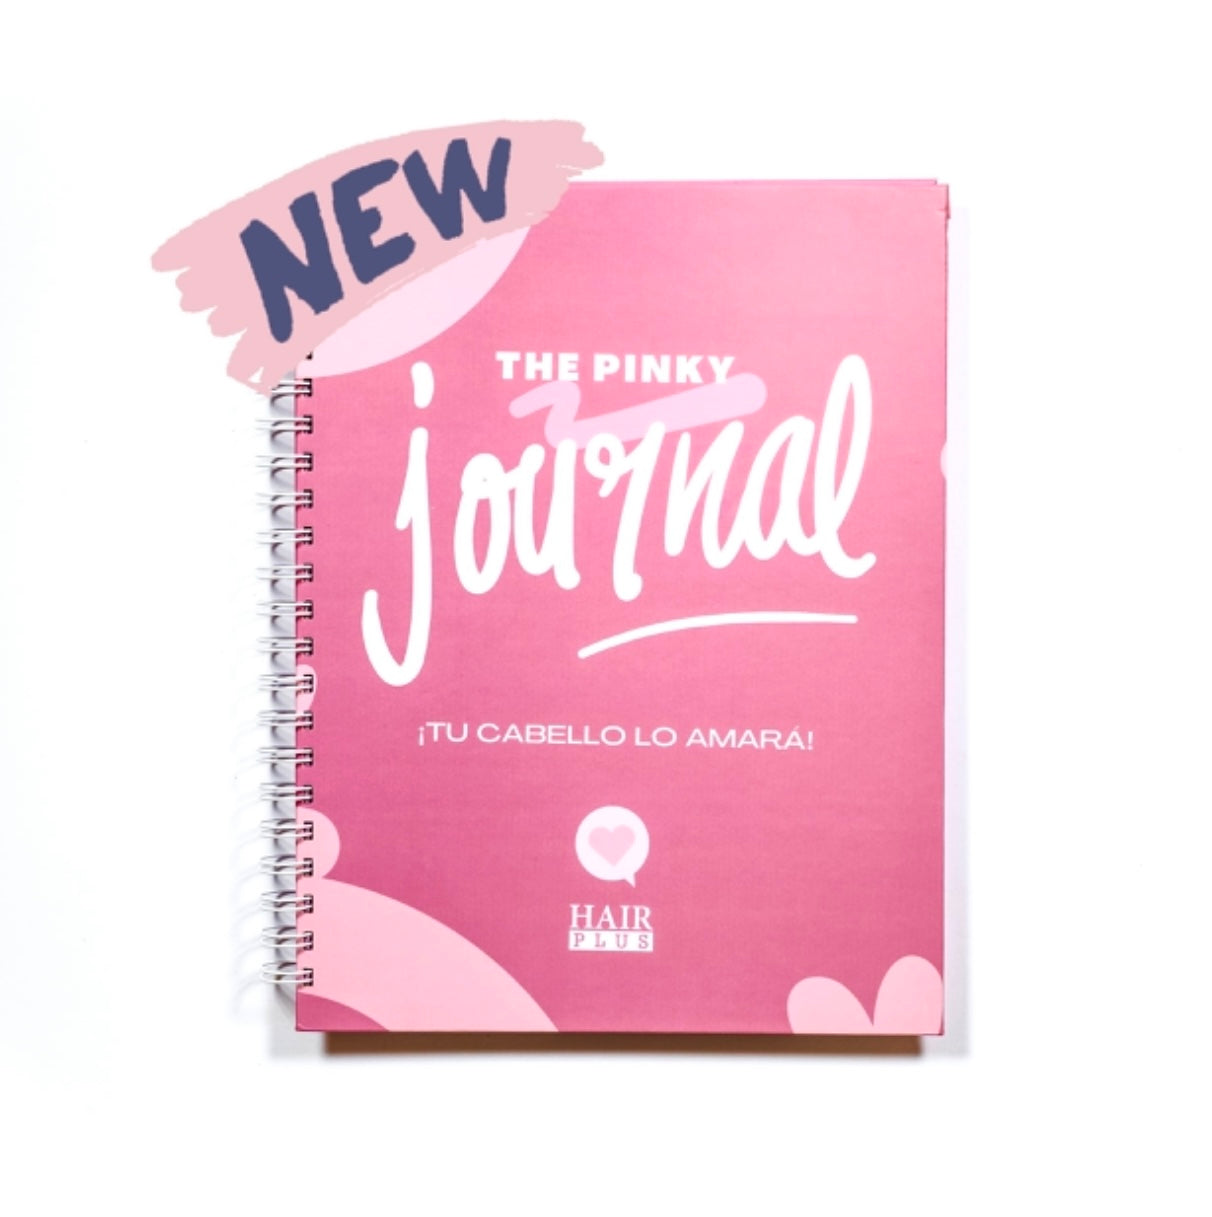 THE PINK JOURNAL